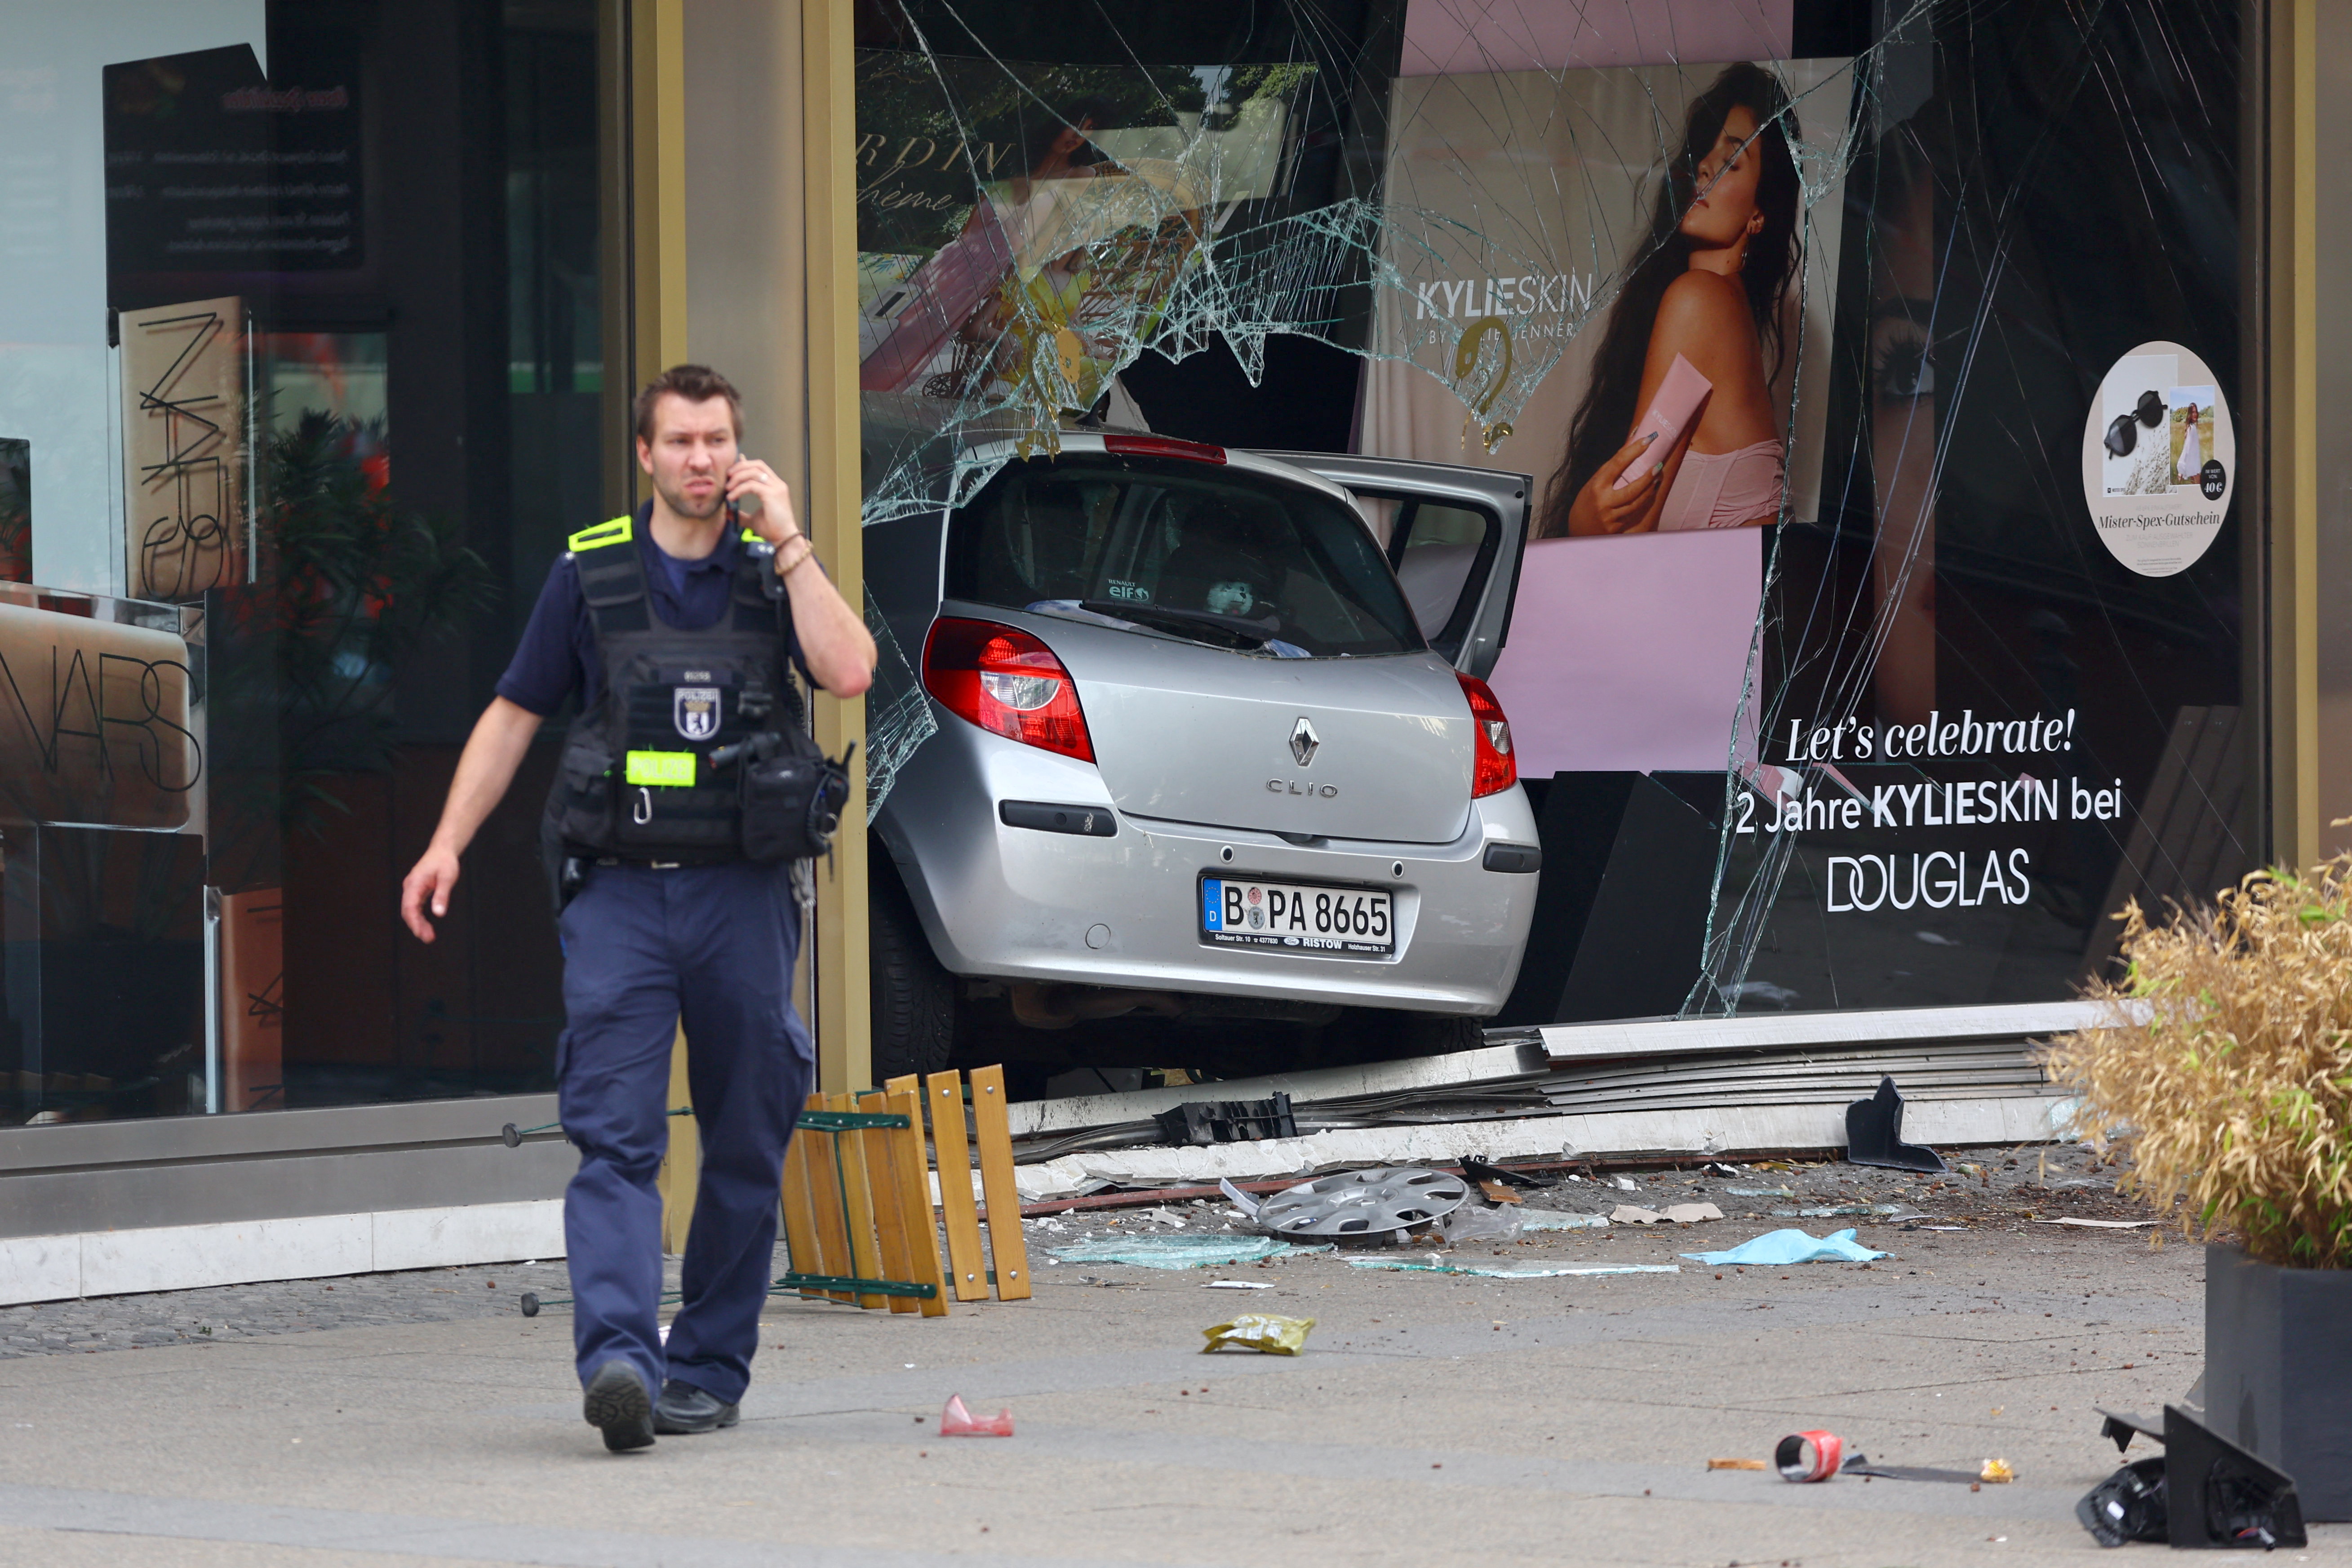 Man drives car into a crowd in Berlin shopping street; one dead, several injured